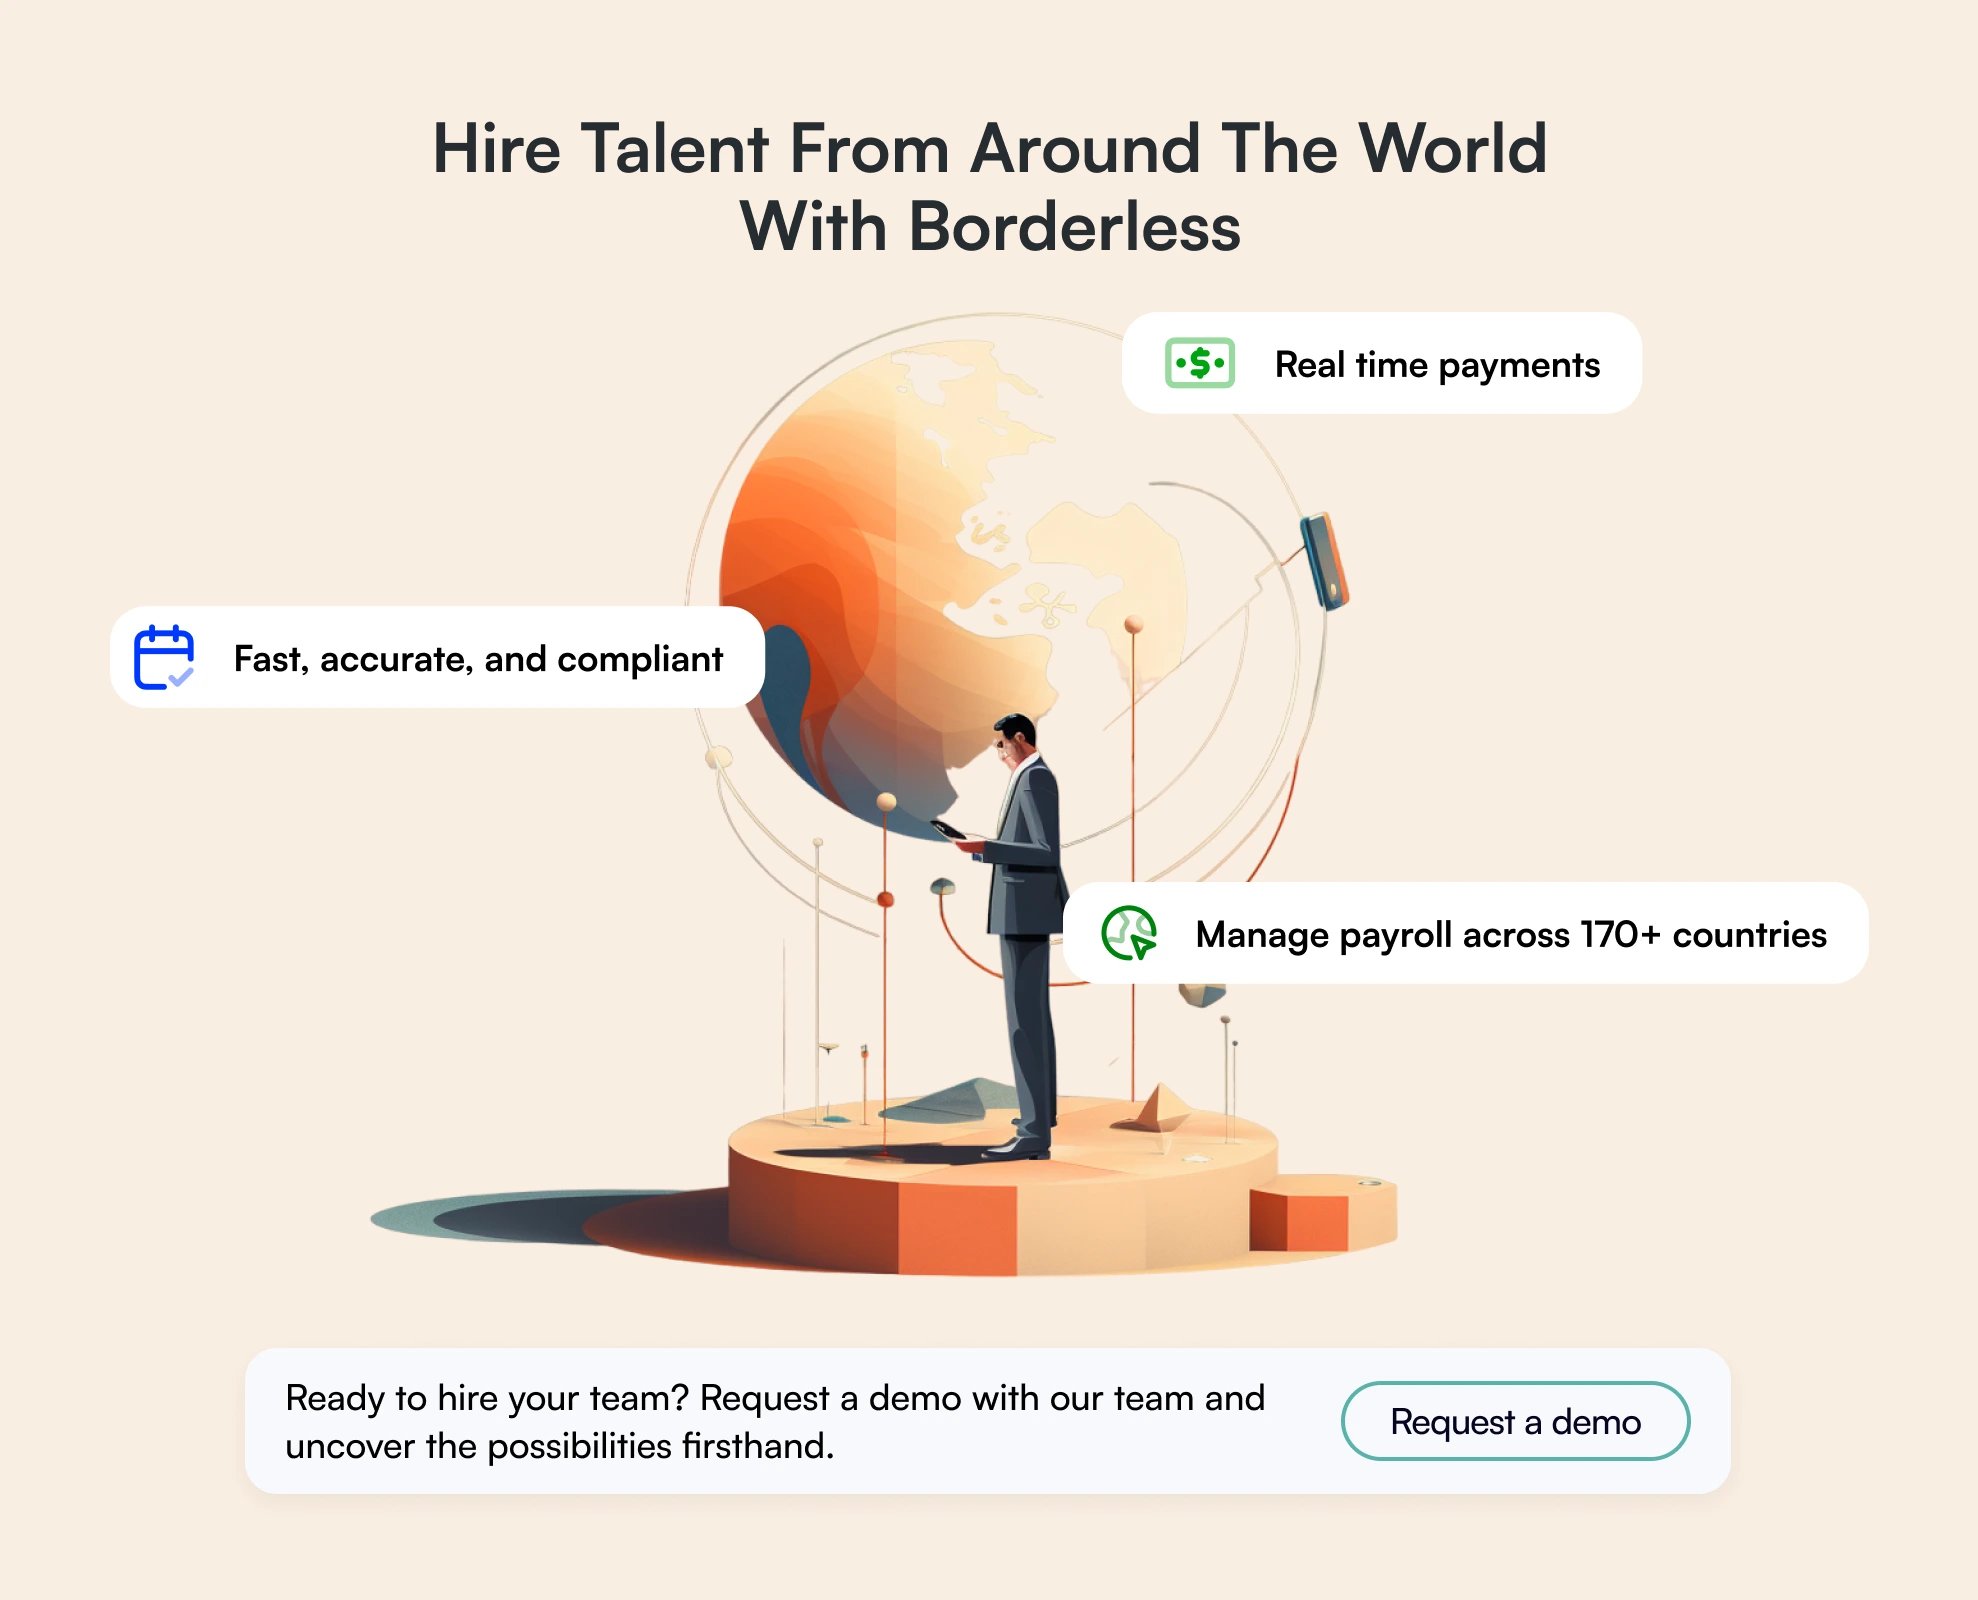 Hire with Borderless